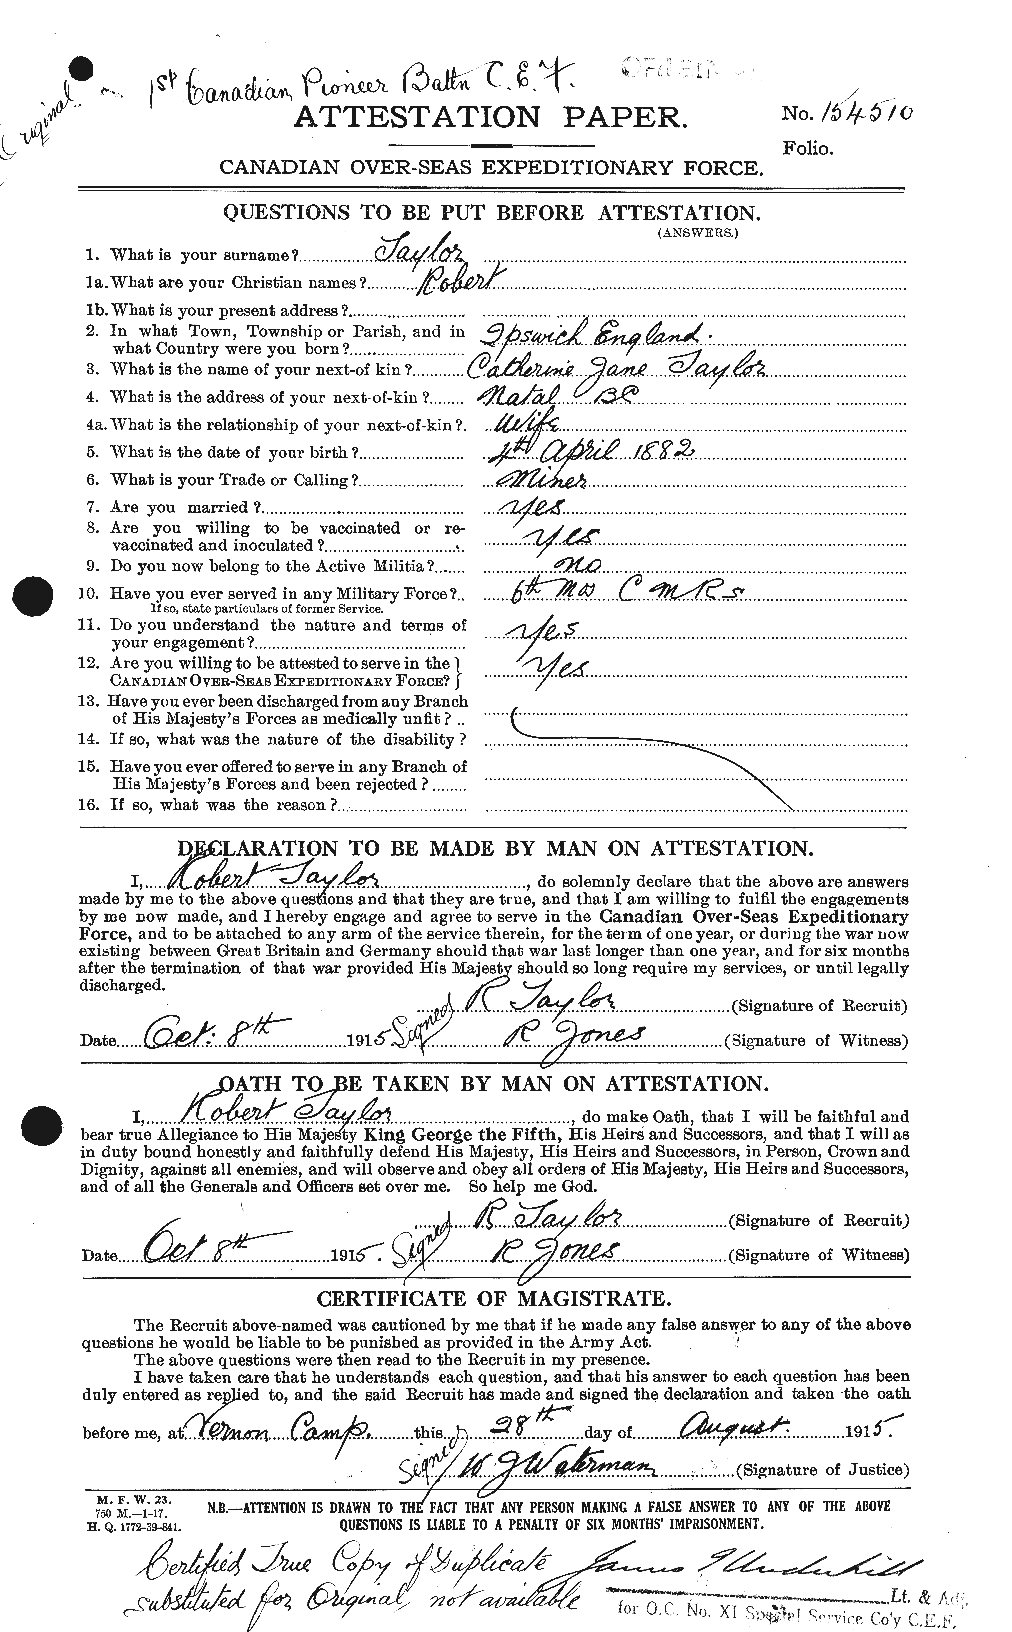 Personnel Records of the First World War - CEF 627446a